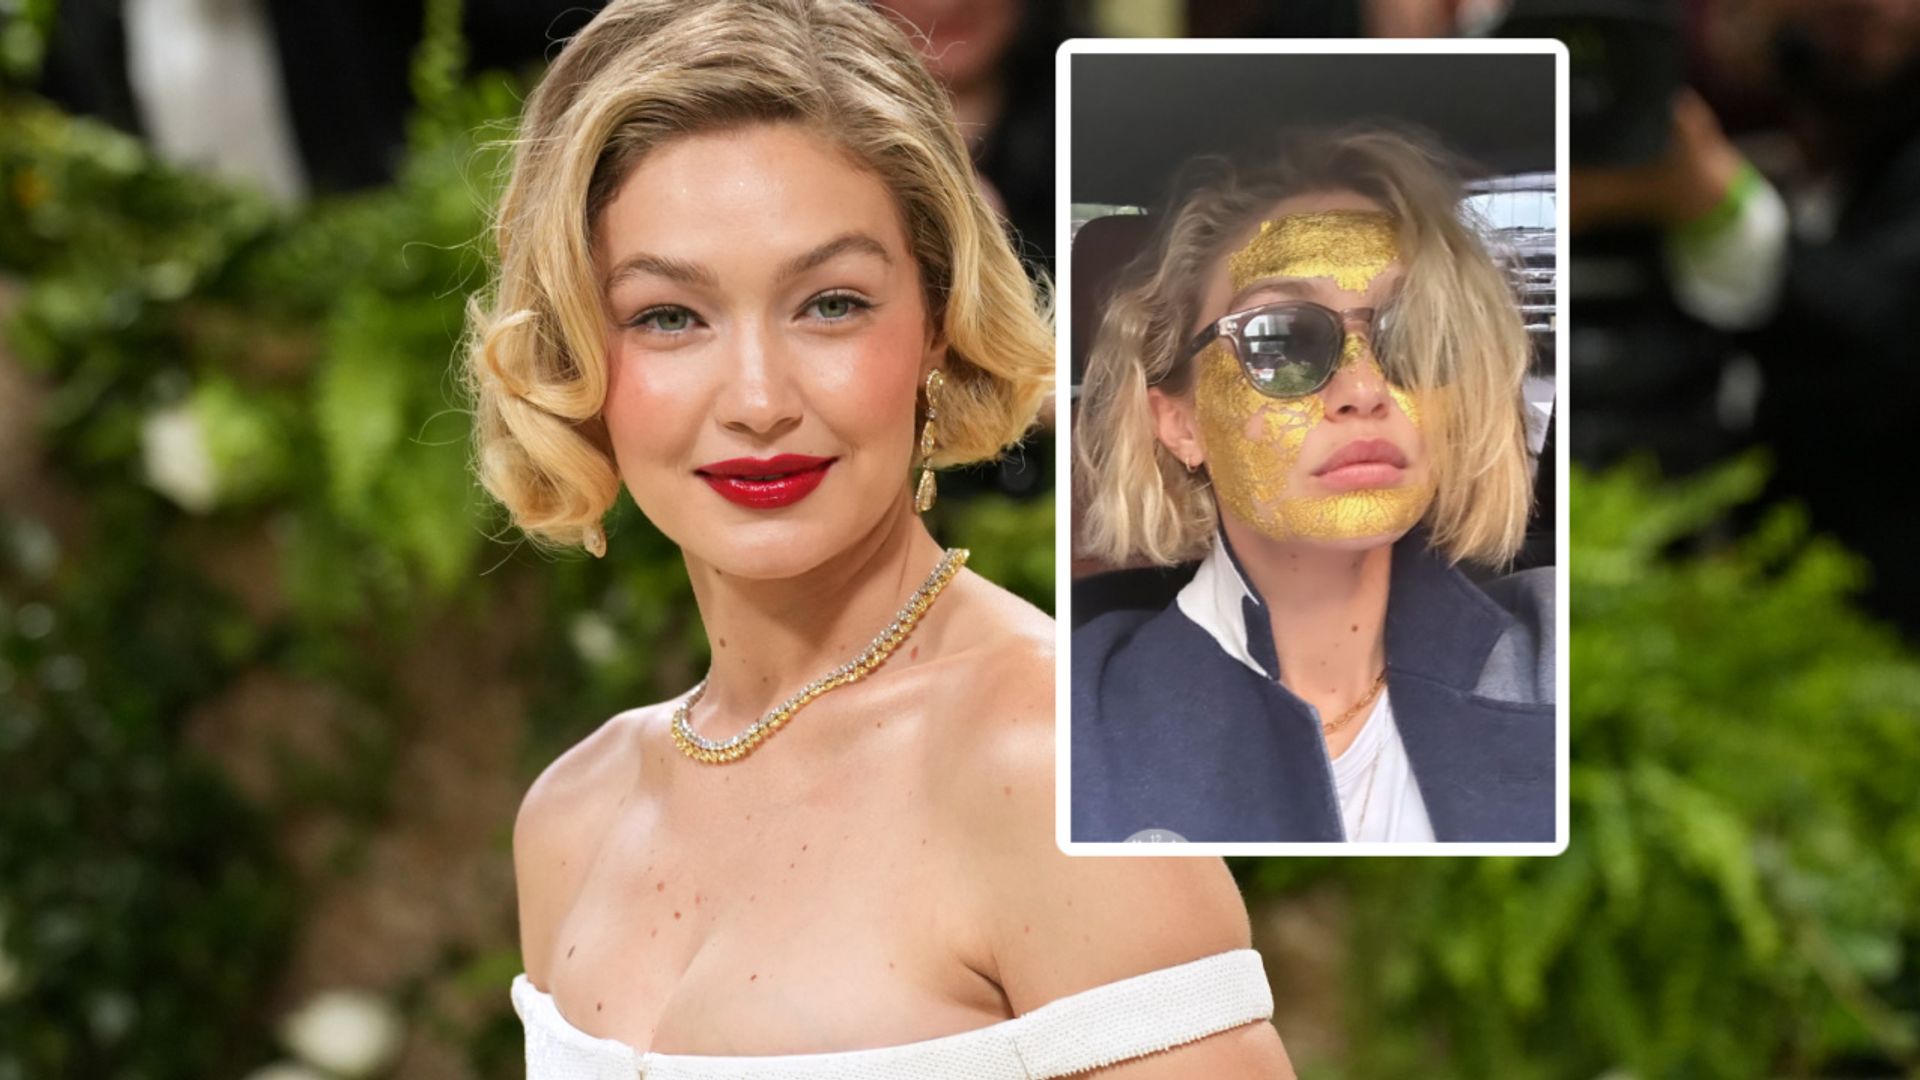 Gigi Hadid's gold leaf face mask gave her such a Met Gala glow and now I’m inspired